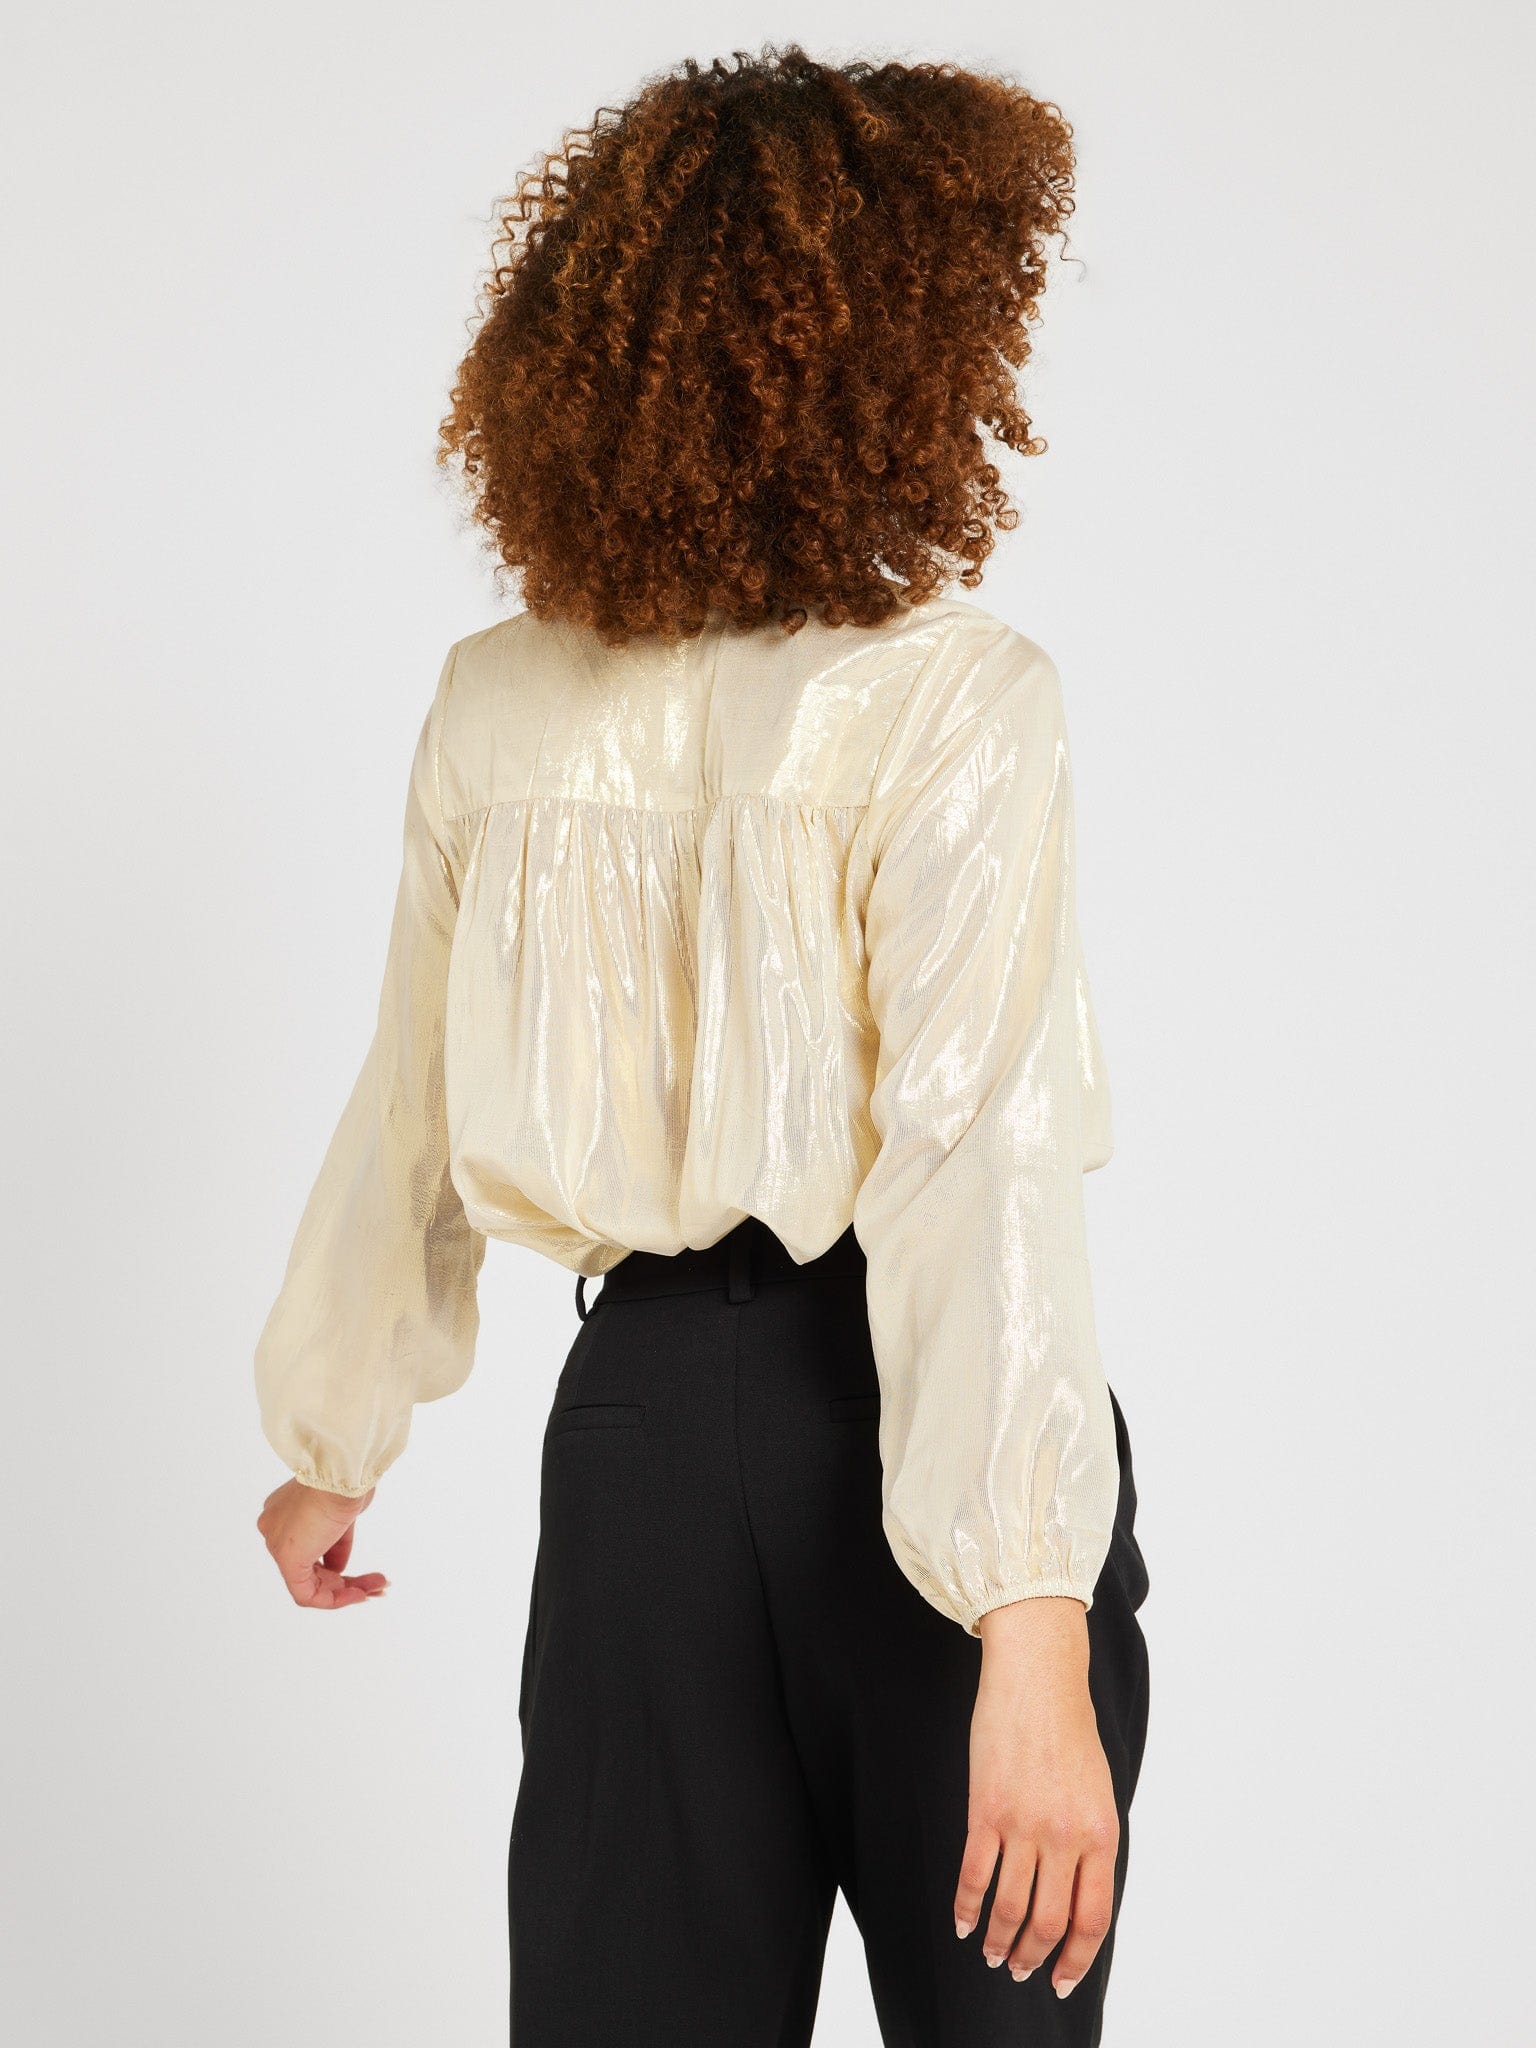 MILLE Clothing Francesca Top in Gold Lamé